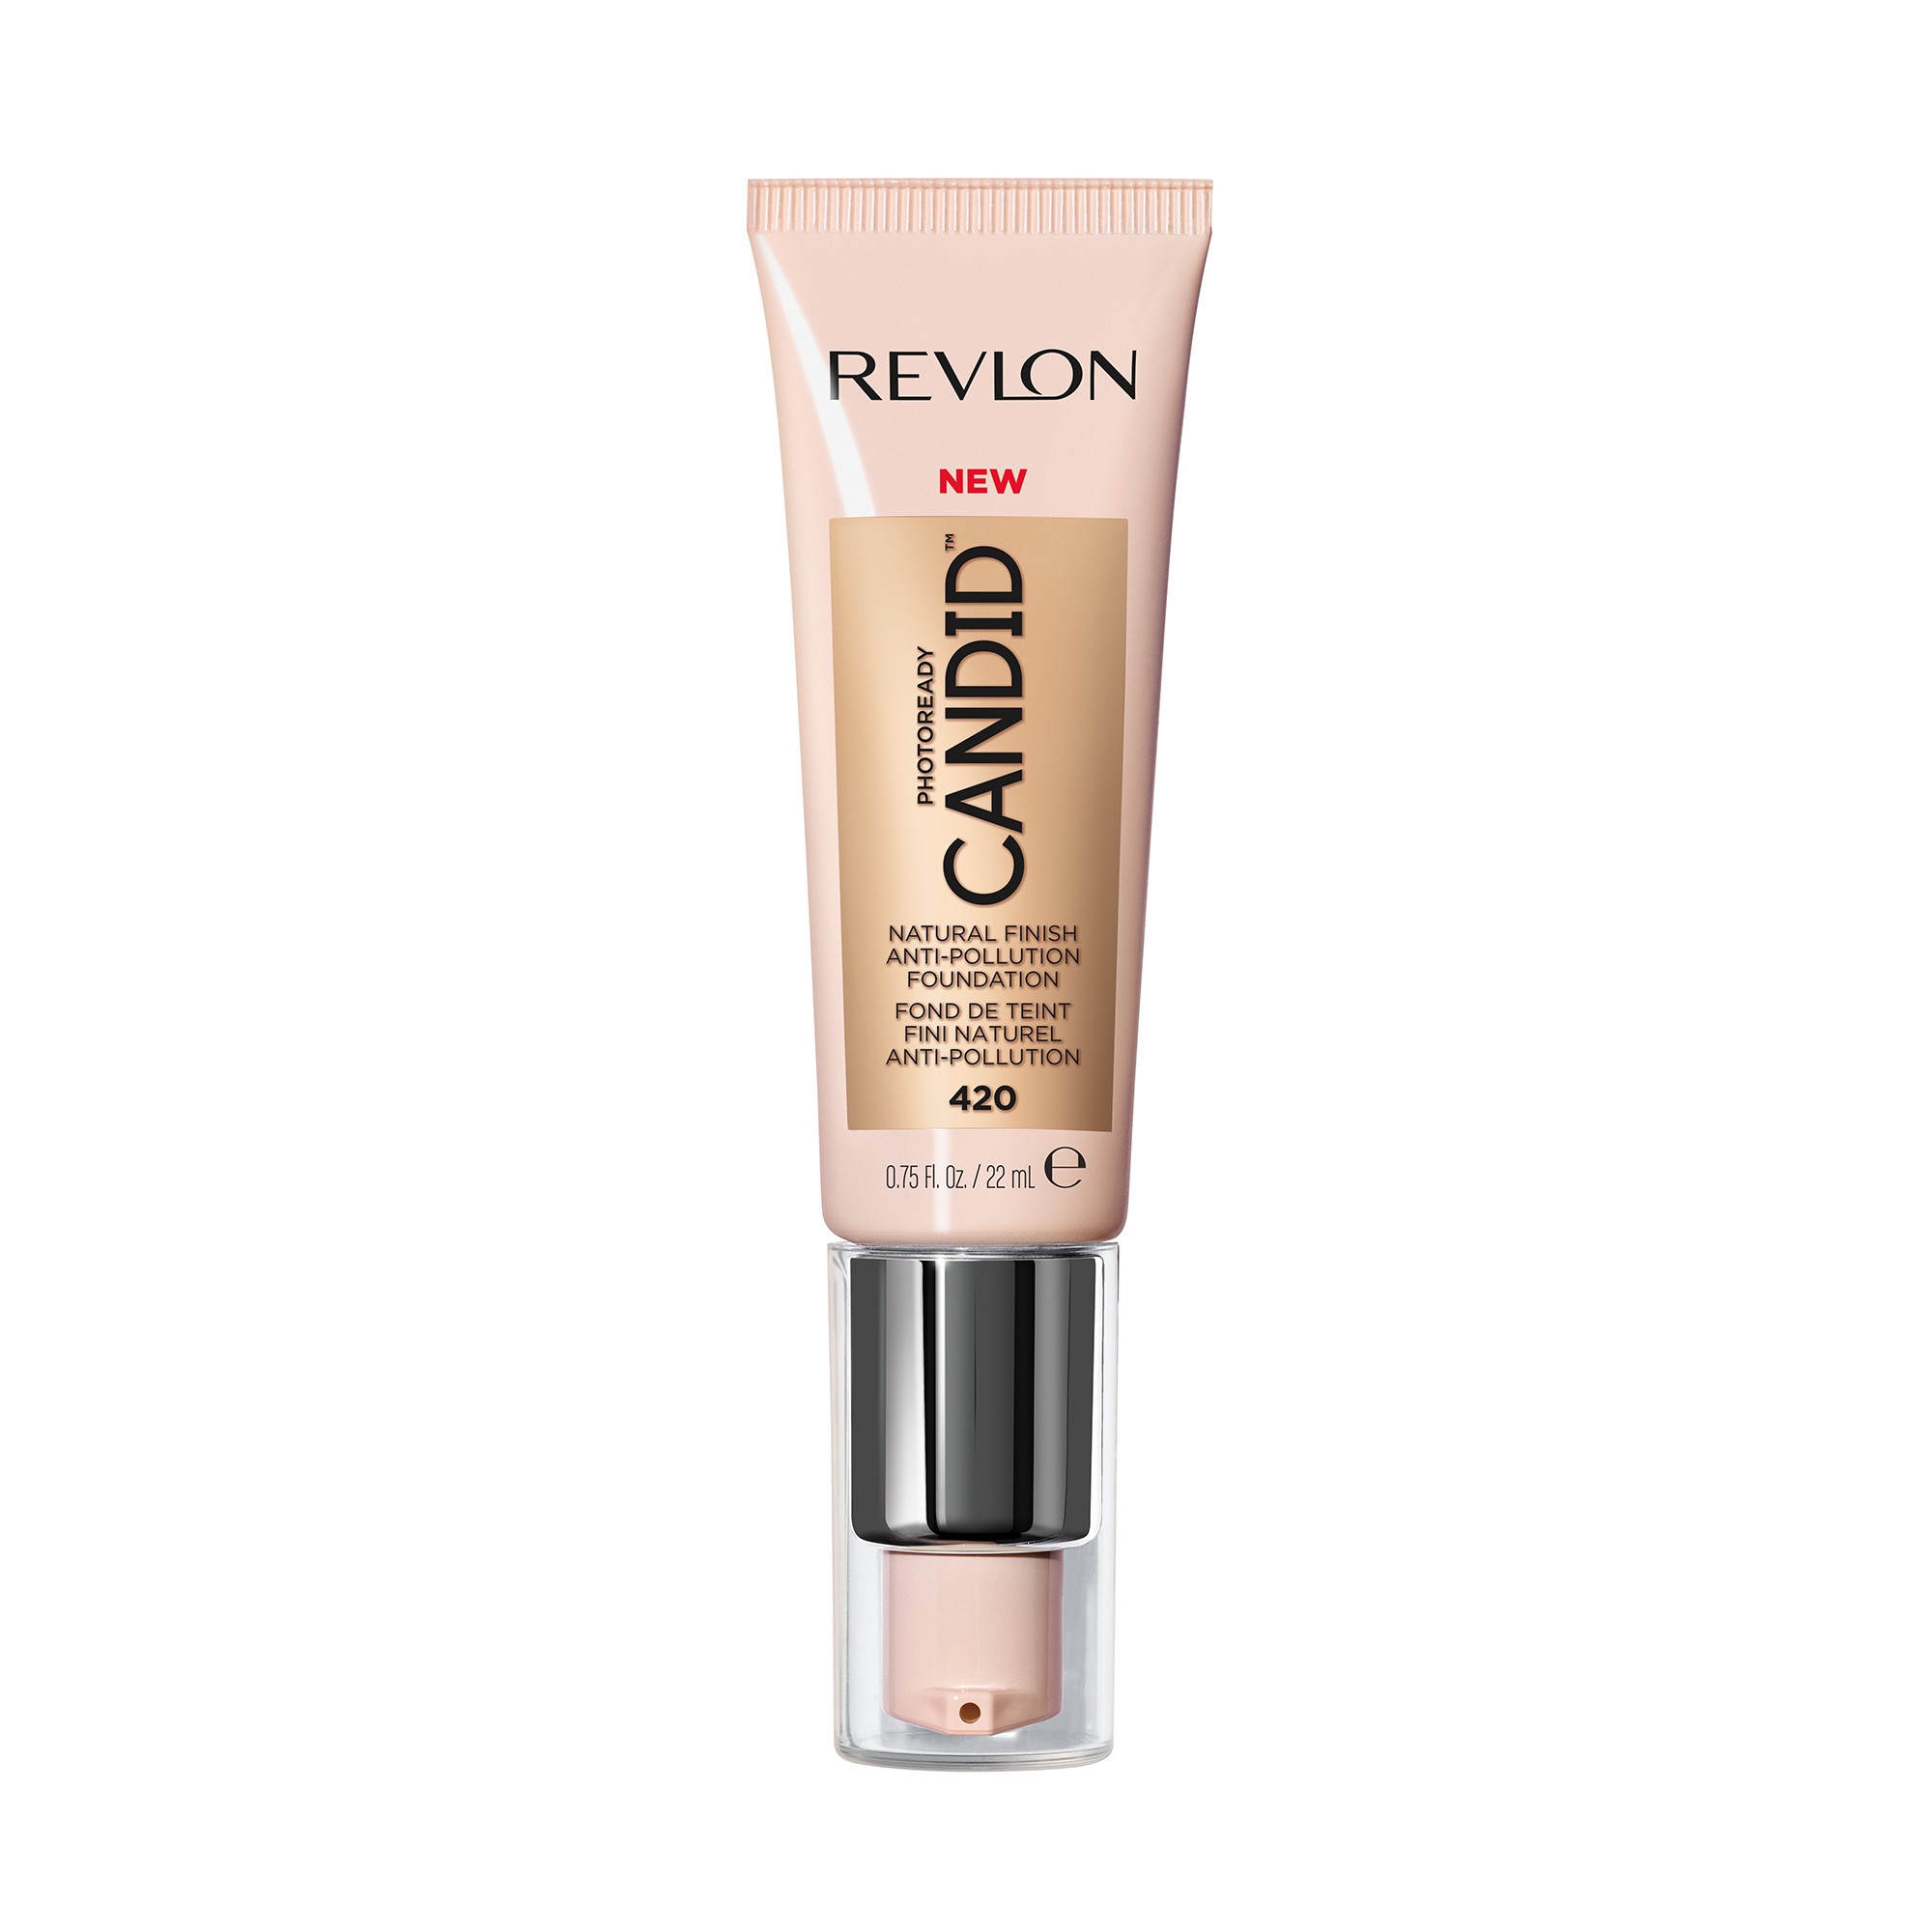 PhotoReady Candid - Natural Finish Anti-Pollution Foundation